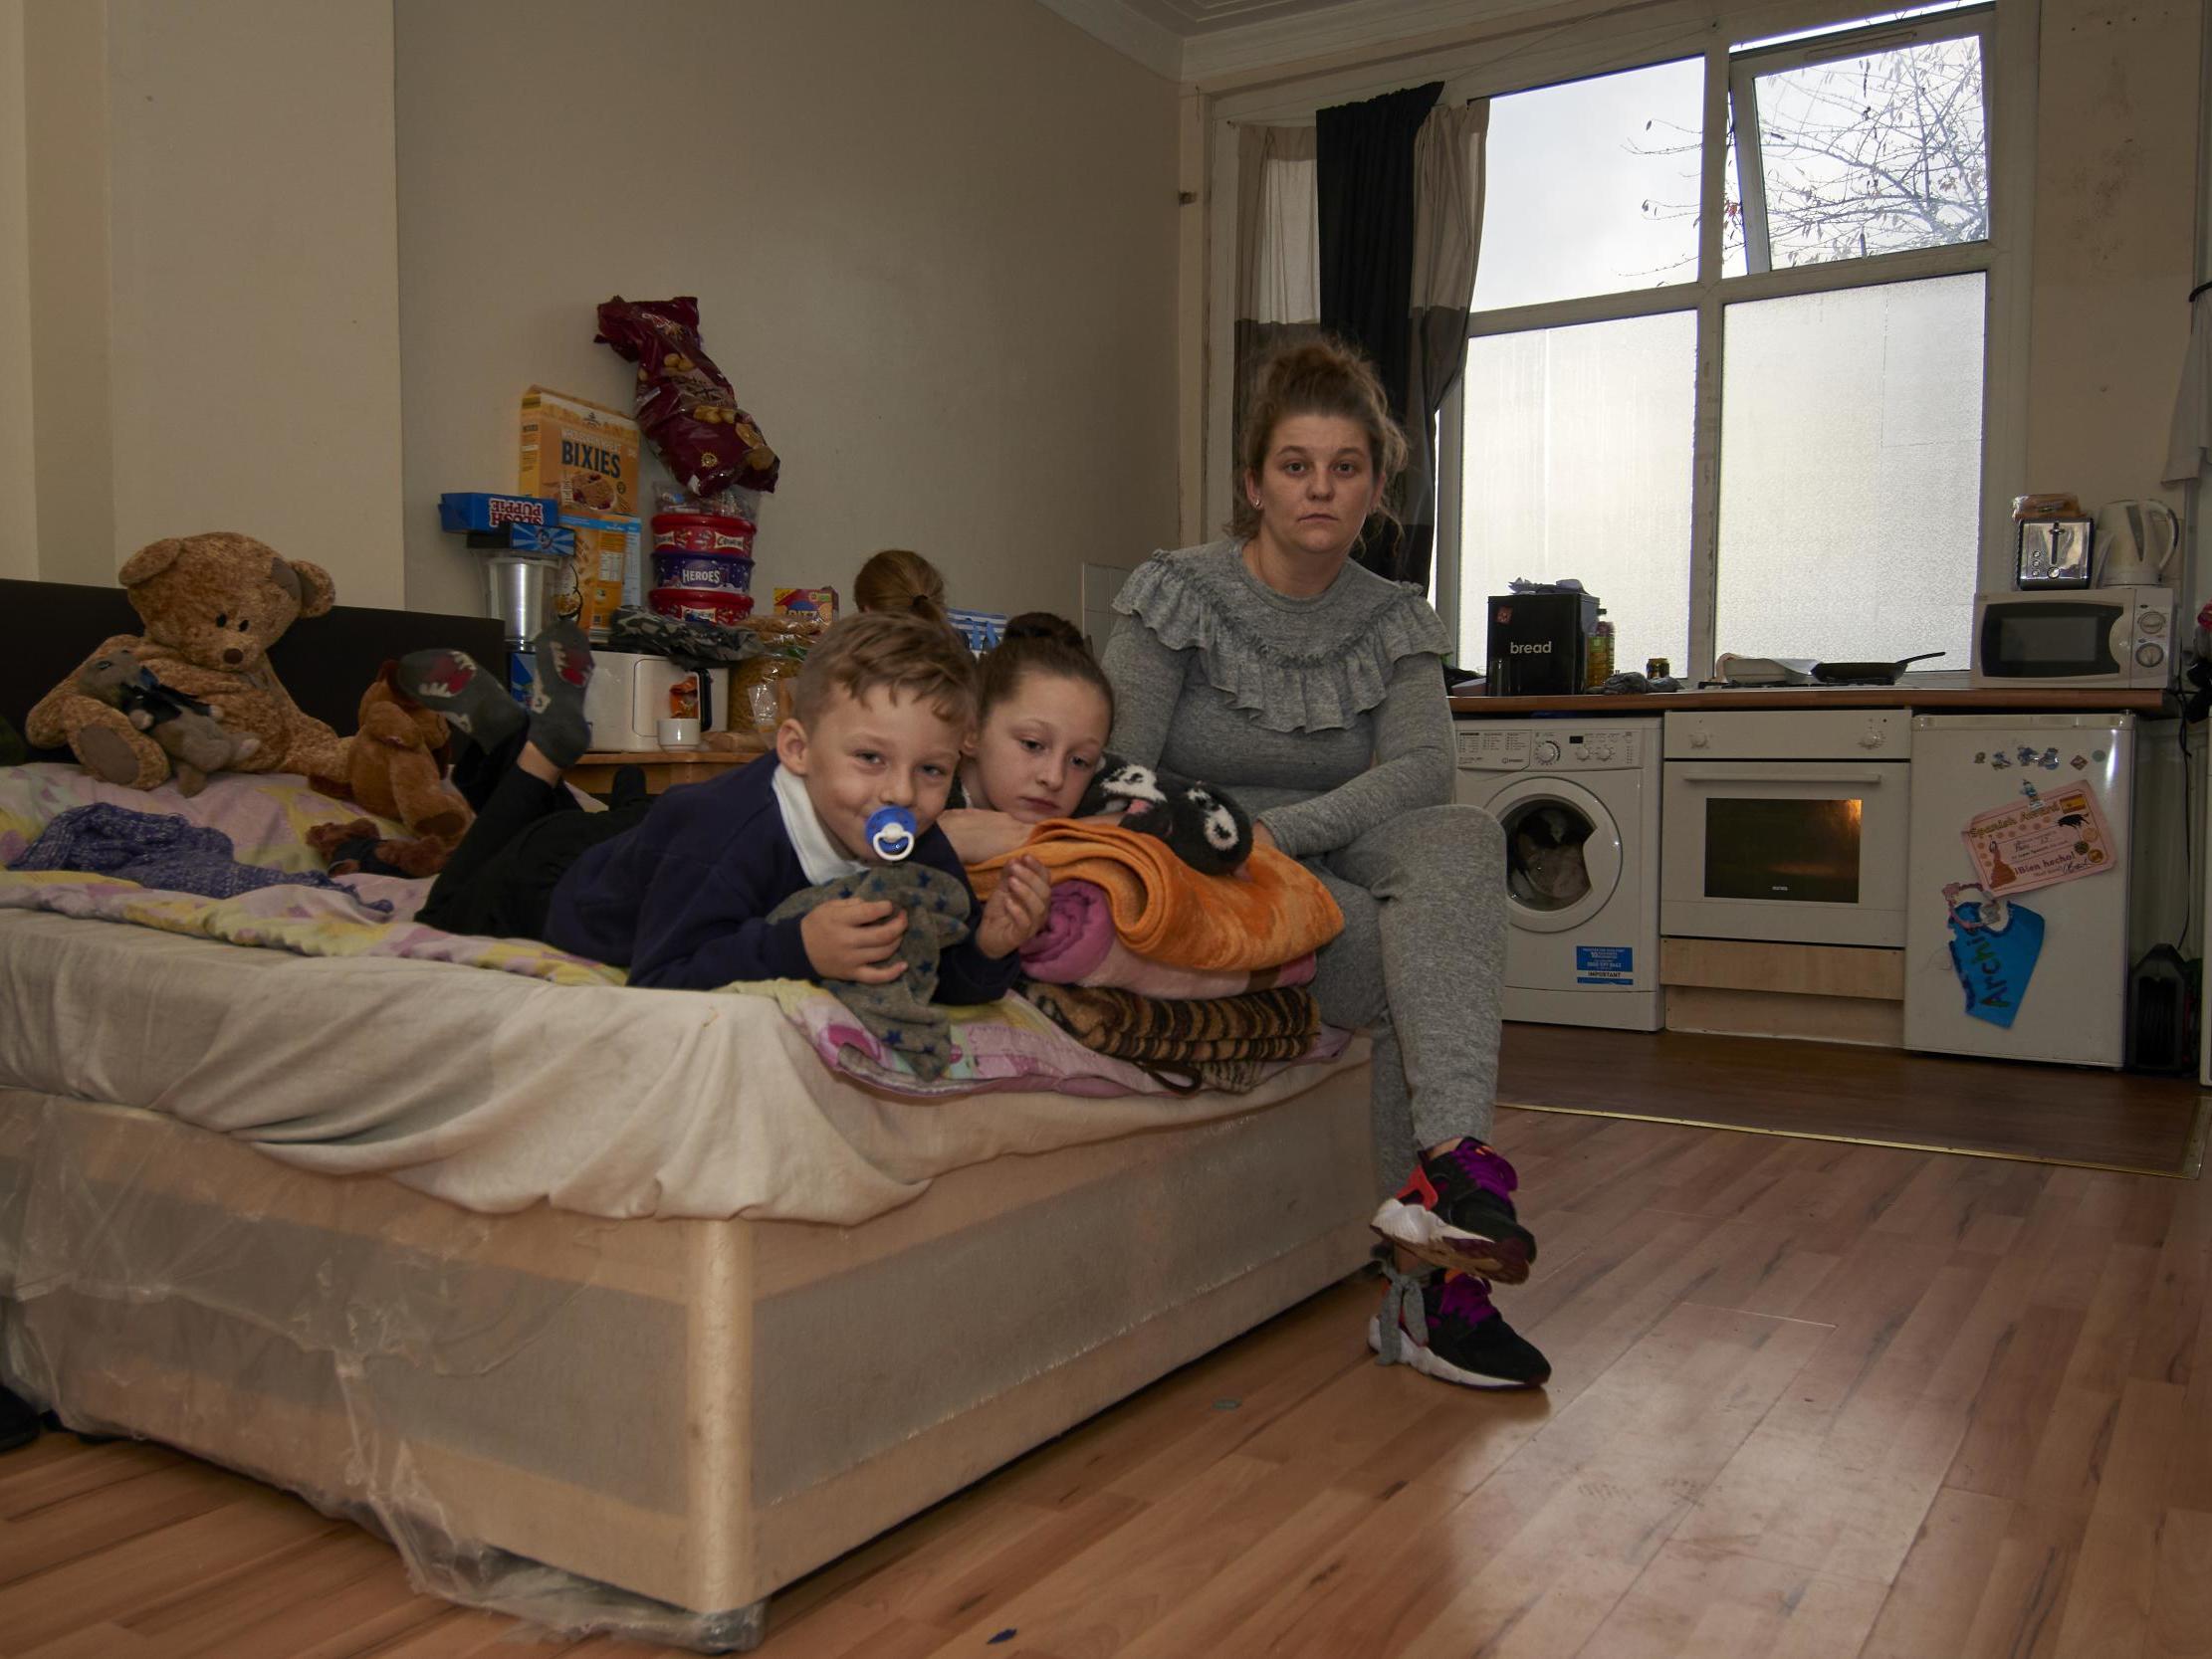 Carly Stutter and her three children share a two-bed room